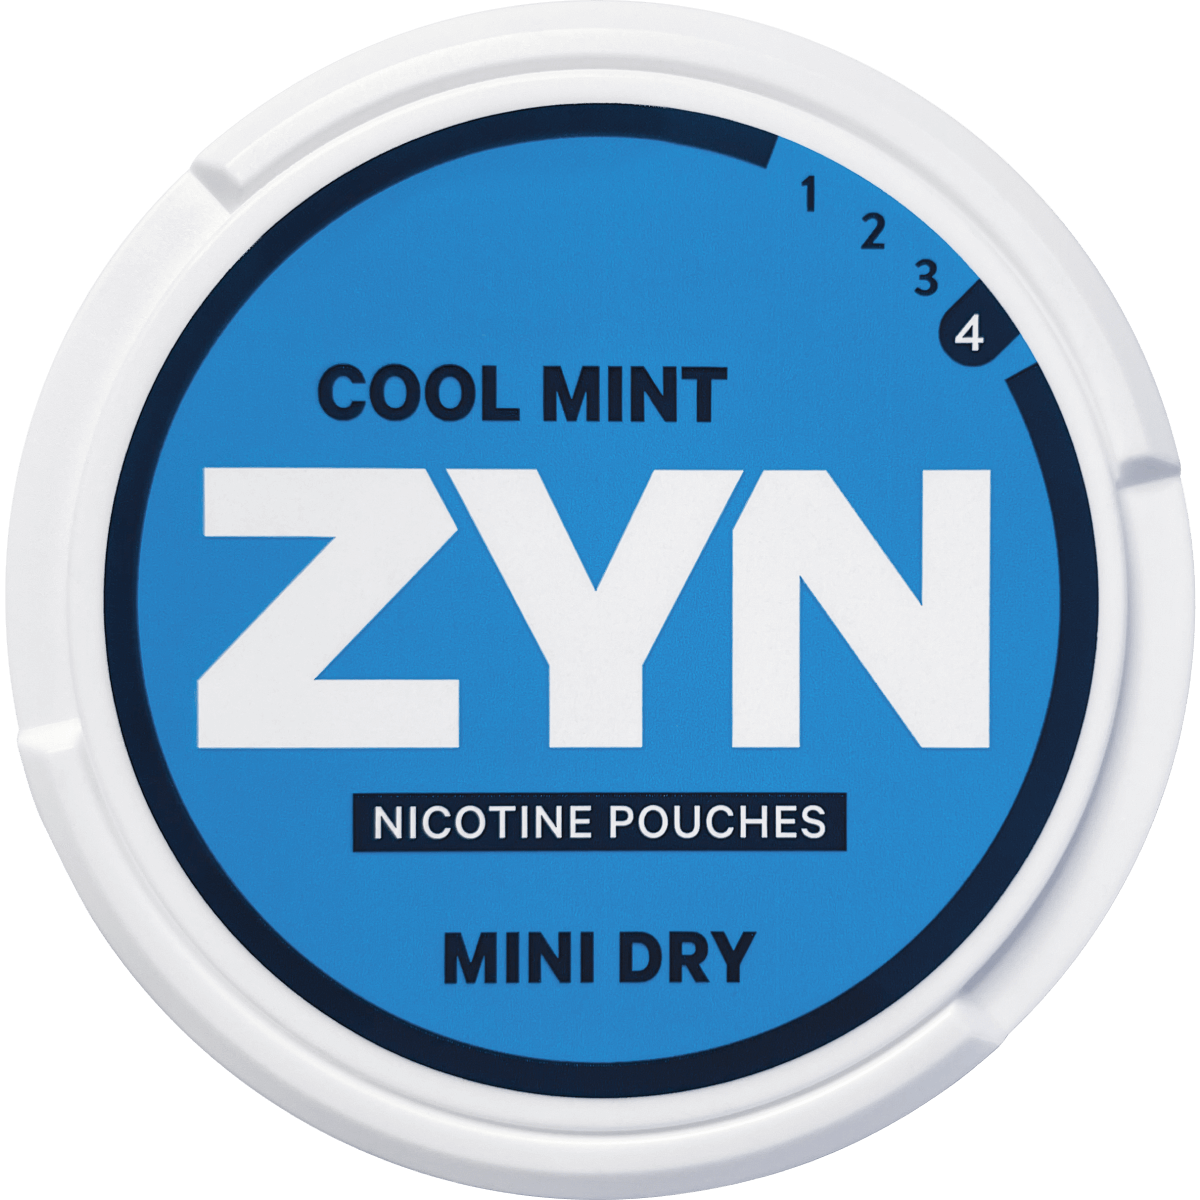 Zyn Cool Mint Mini Dry Extra Strong